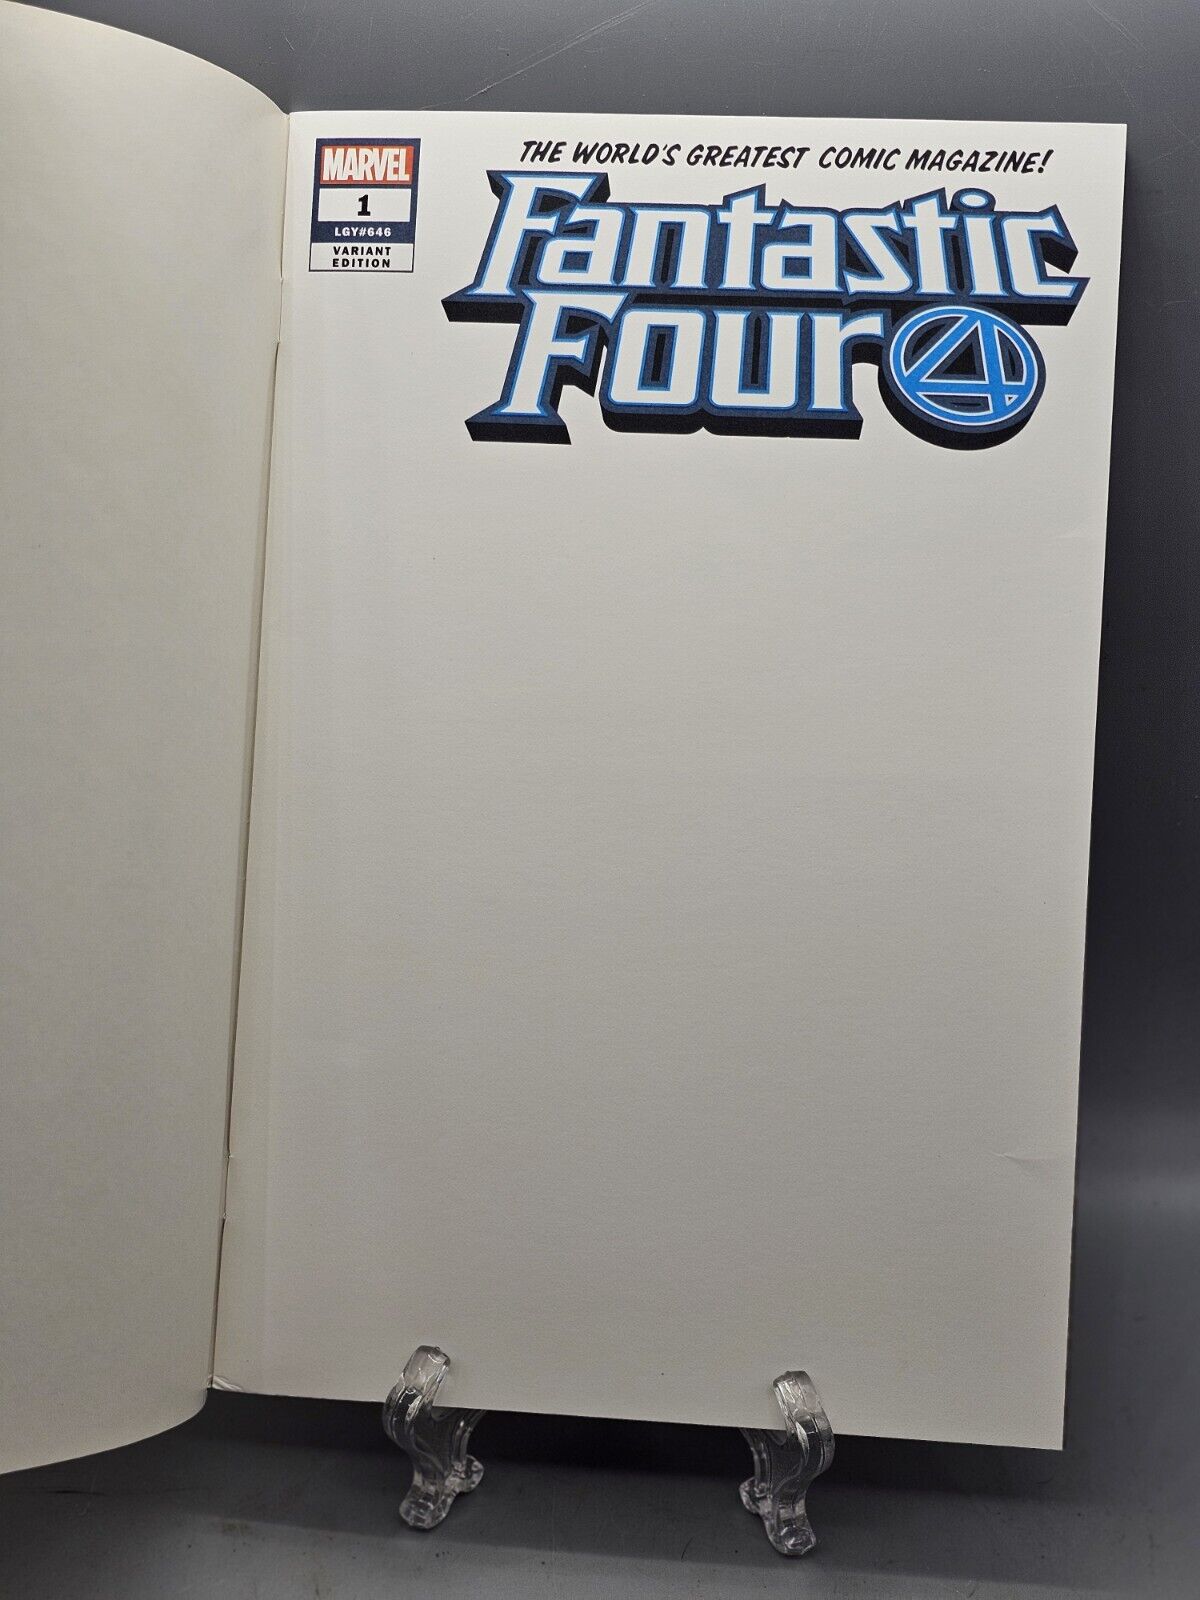 Fantastic Four #1 Variant Blank Cover Artist Cover Comic-Con